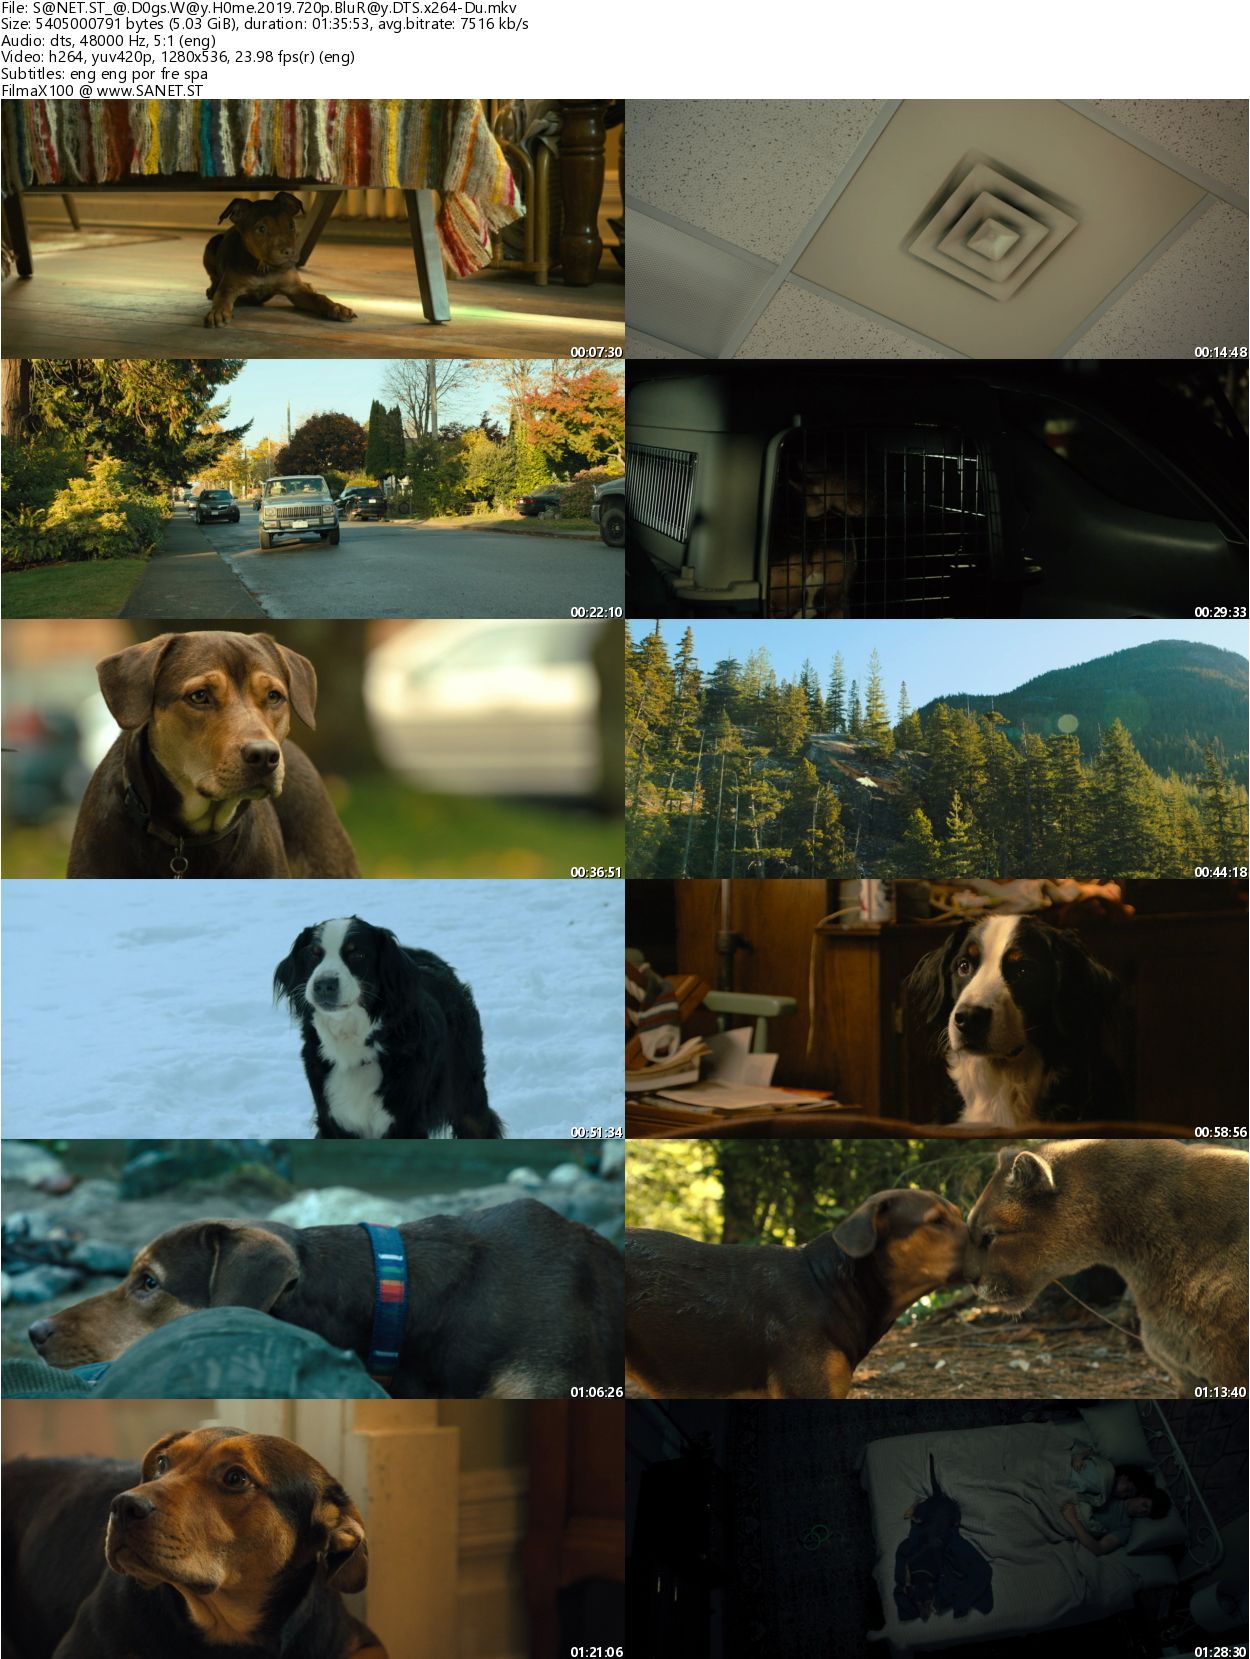 Download A Dogs Way Home 2019 720p BluRay DTS x264-Du - SoftArchive1250 x 1659